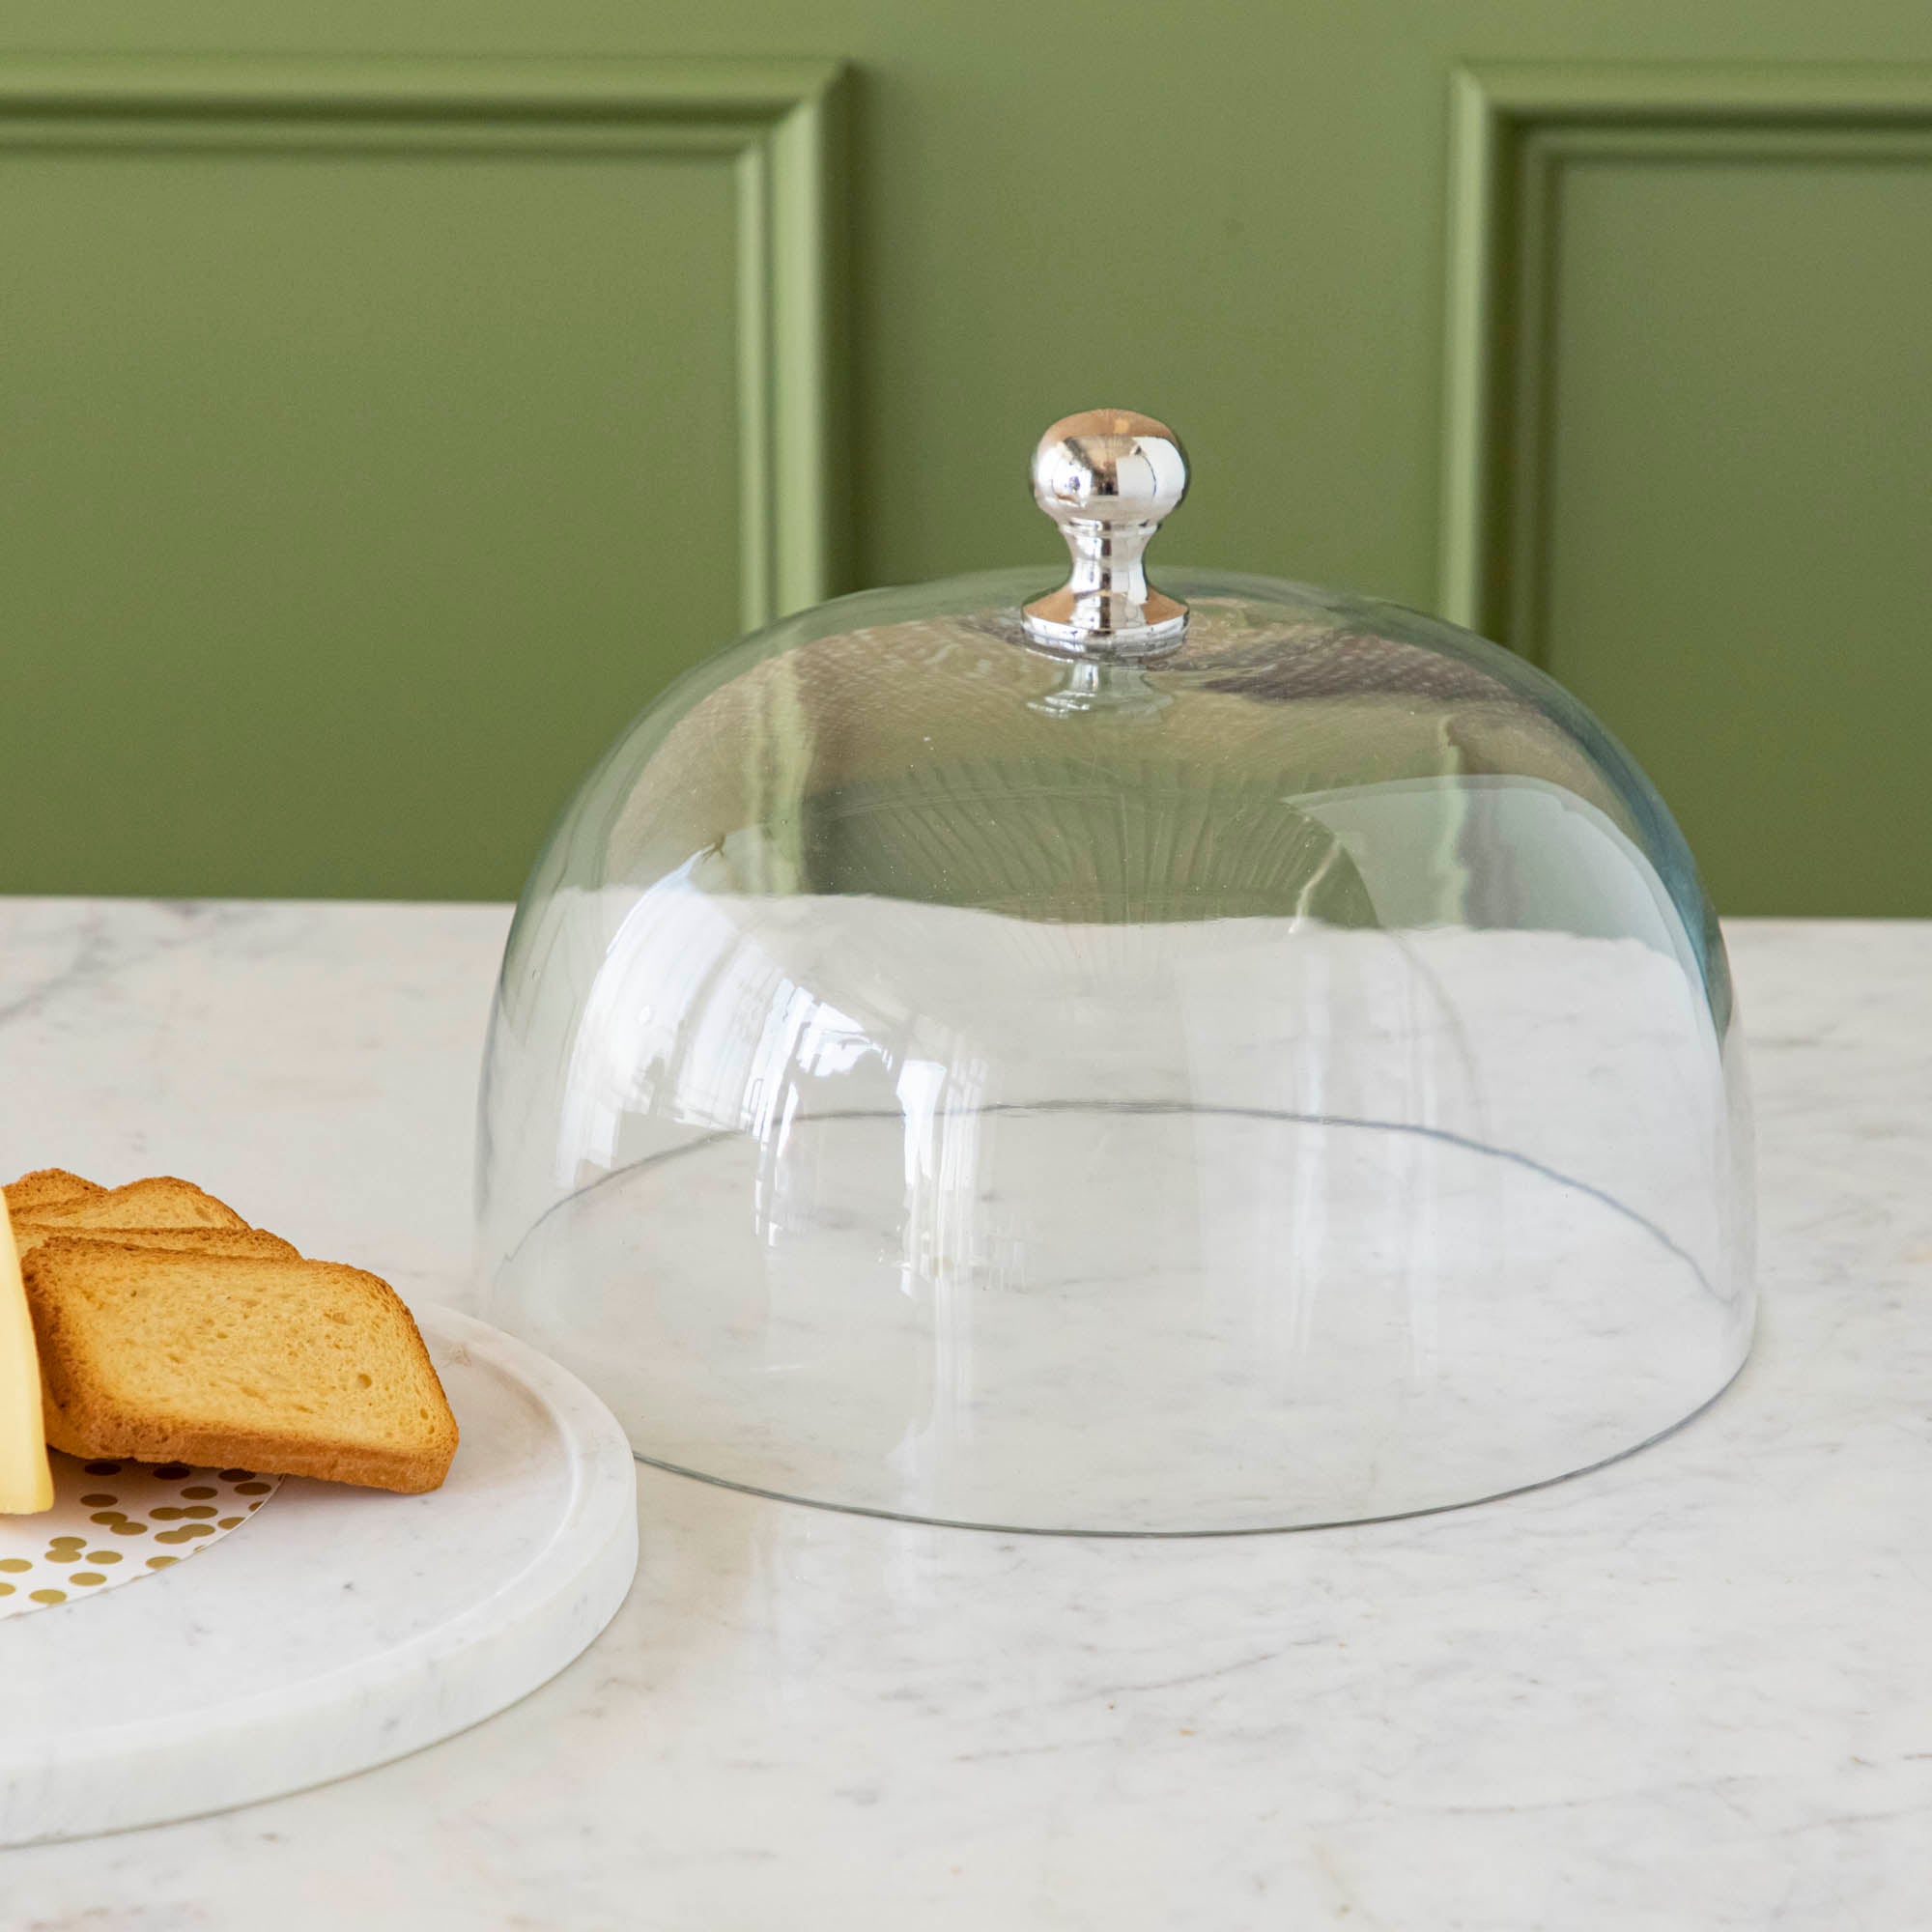 Chocolate muffins under a Bidk Home Marble &amp; Glass Food Dome with Knob, 11.5&quot; Diameter, presented on a white marble plate.